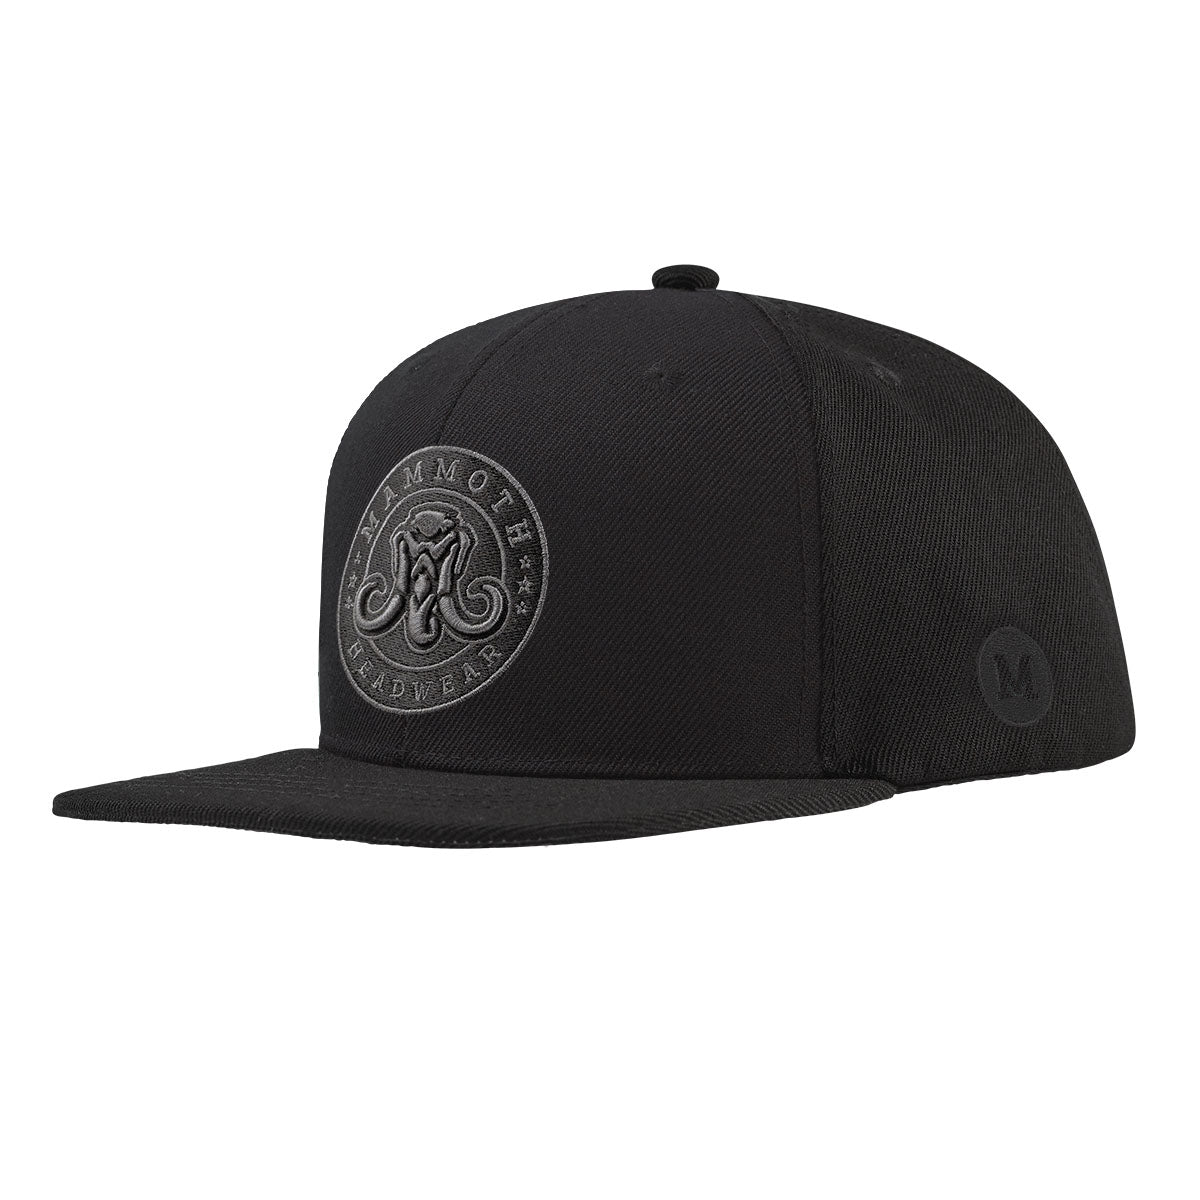 CLASSIC SNAPBACK - BLACKED OUT